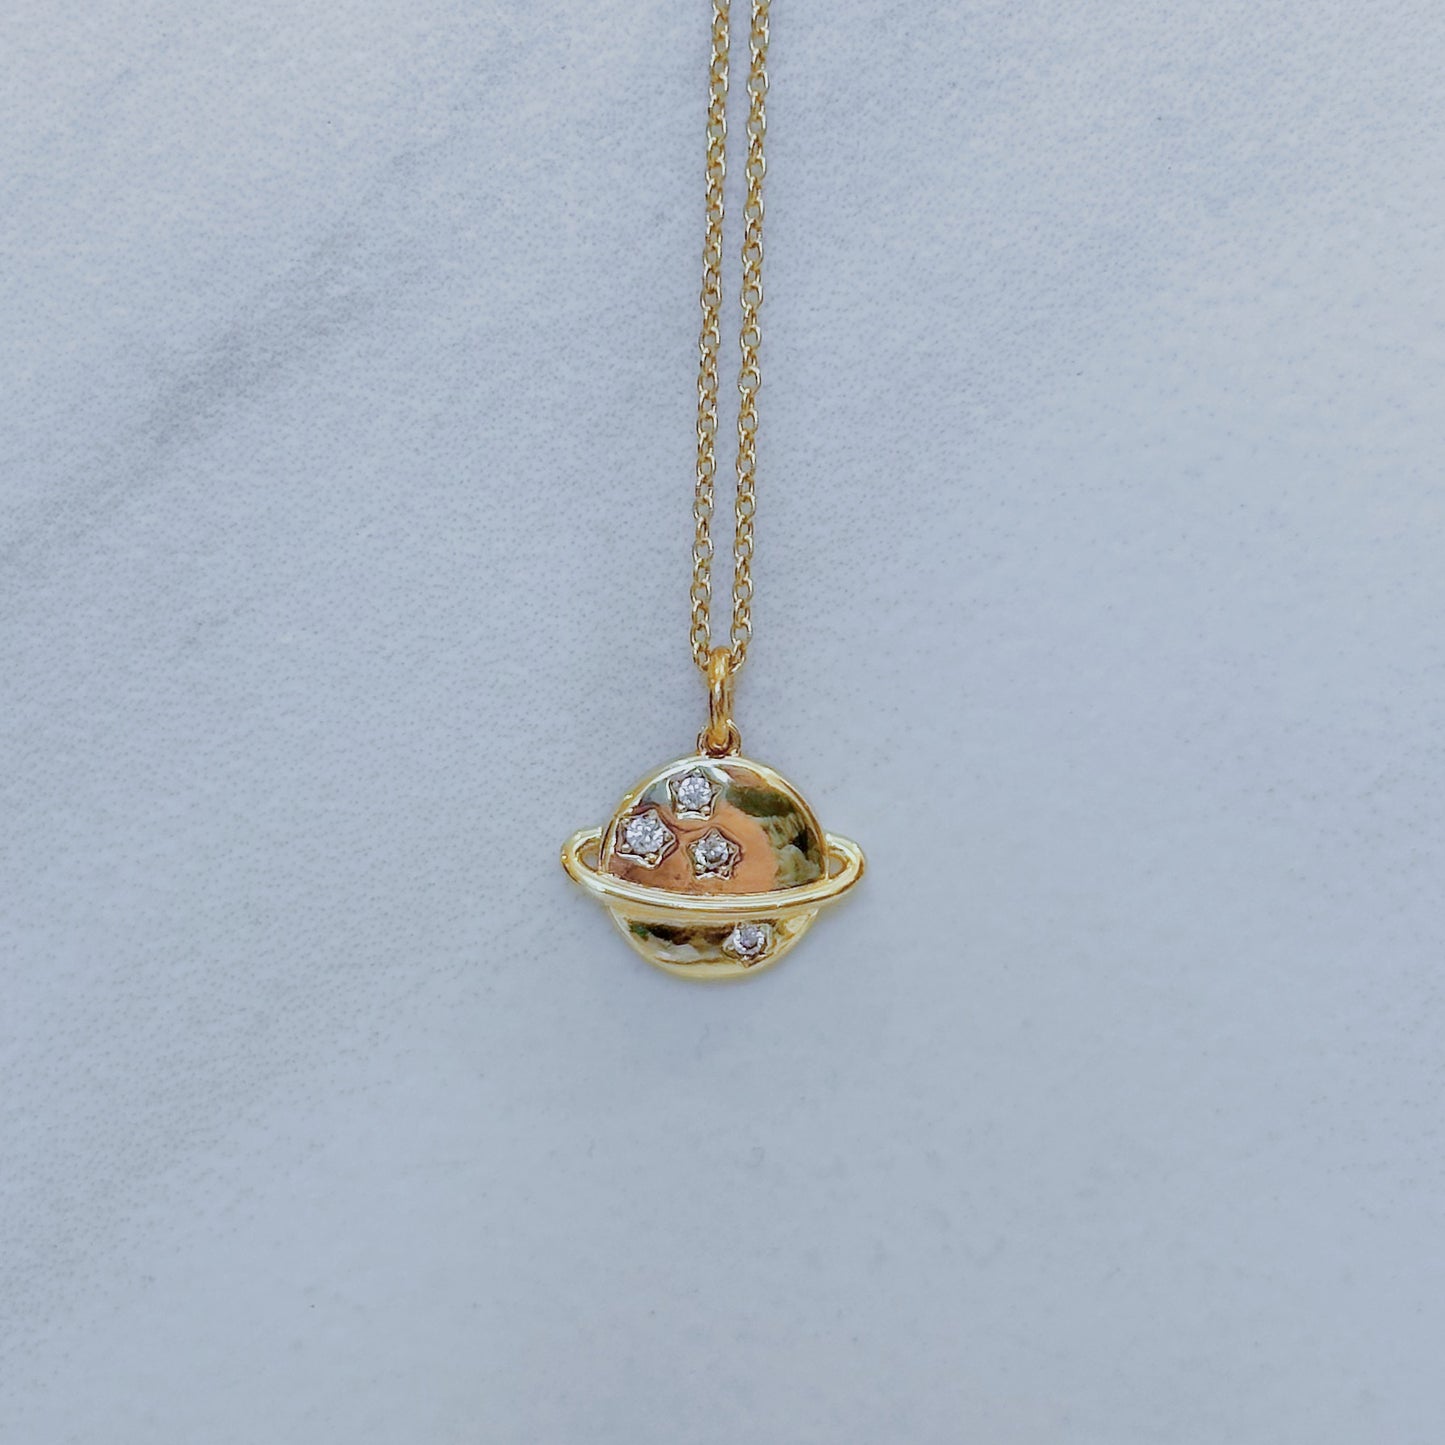 Saturn charm necklace